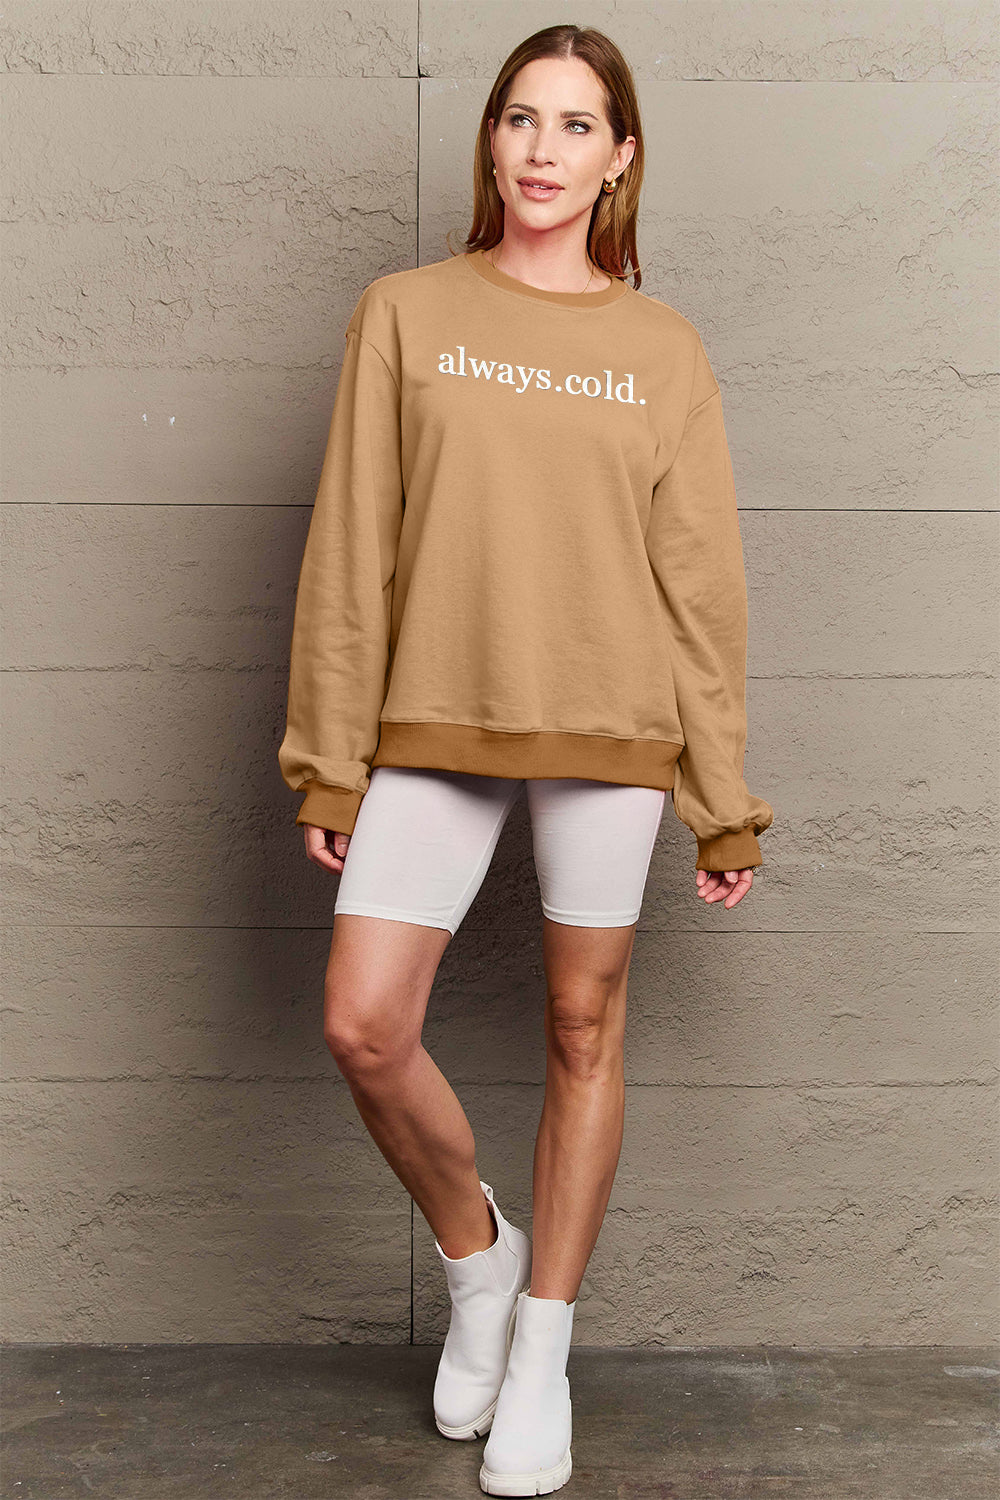 Simply Love Full Size ALWAYS.COLD. Graphic Sweatshirt Trendsi